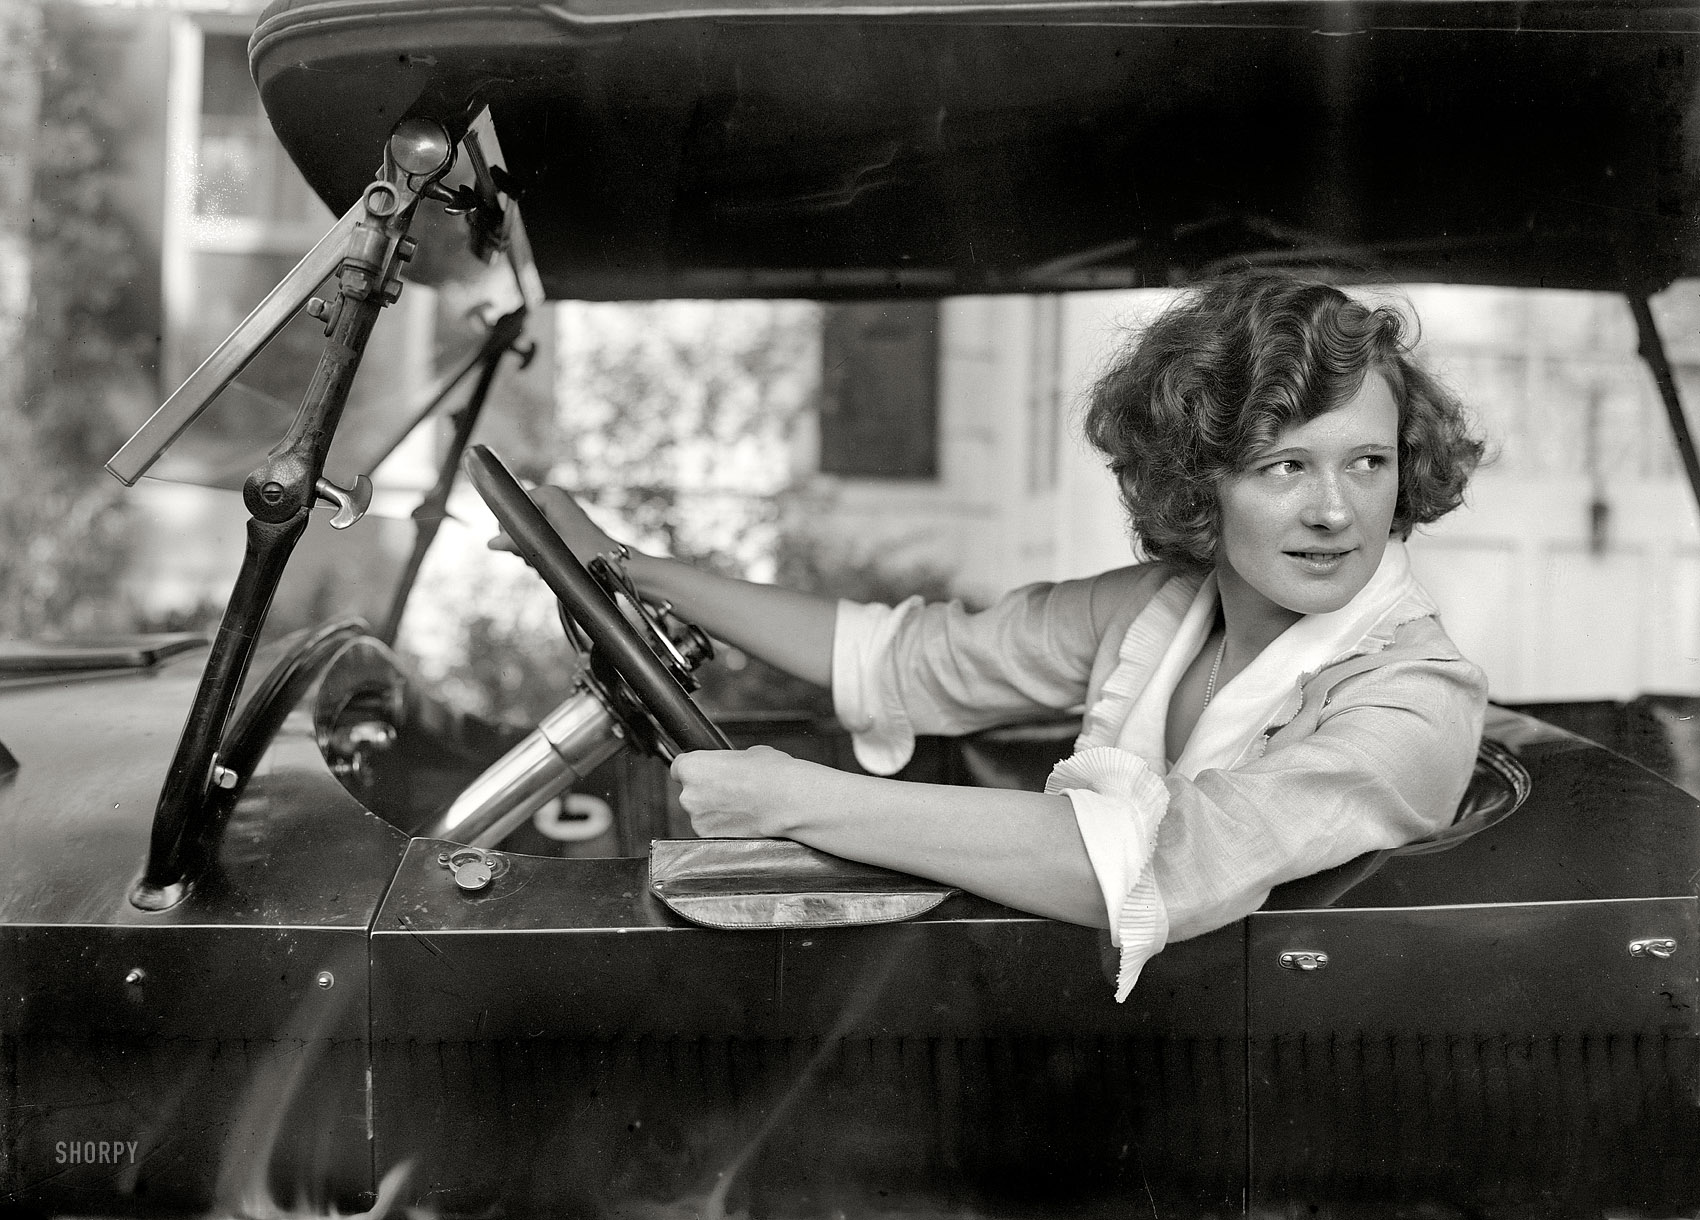 New York circa 1921. "Miller." Stage actress Marilyn Miller in the driver's seat. 5x7 inch dry plate glass negative, George Grantham Bain Collection. View full size.